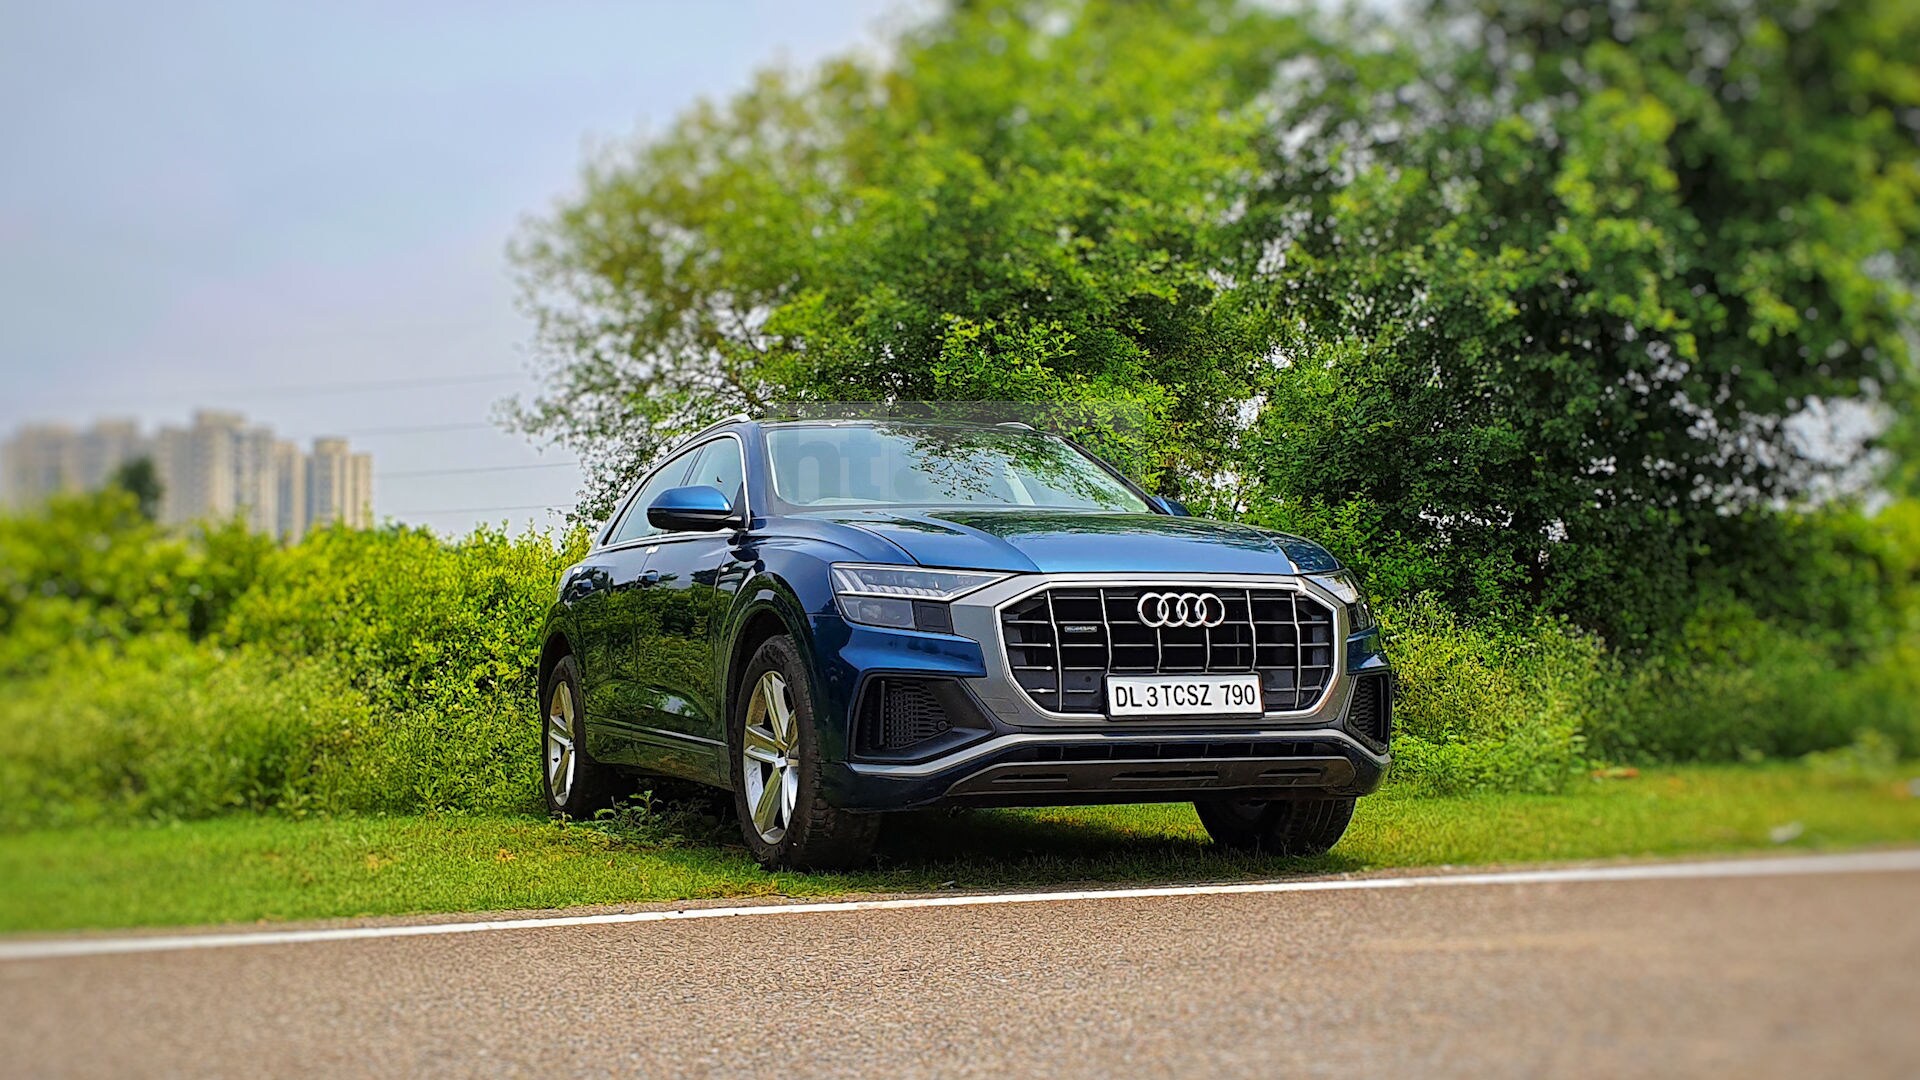 Audi Q8 attempts to chart a path of its own for the German luxury car brand. (HTAuto.com/Sabyasachi Dasgupta)